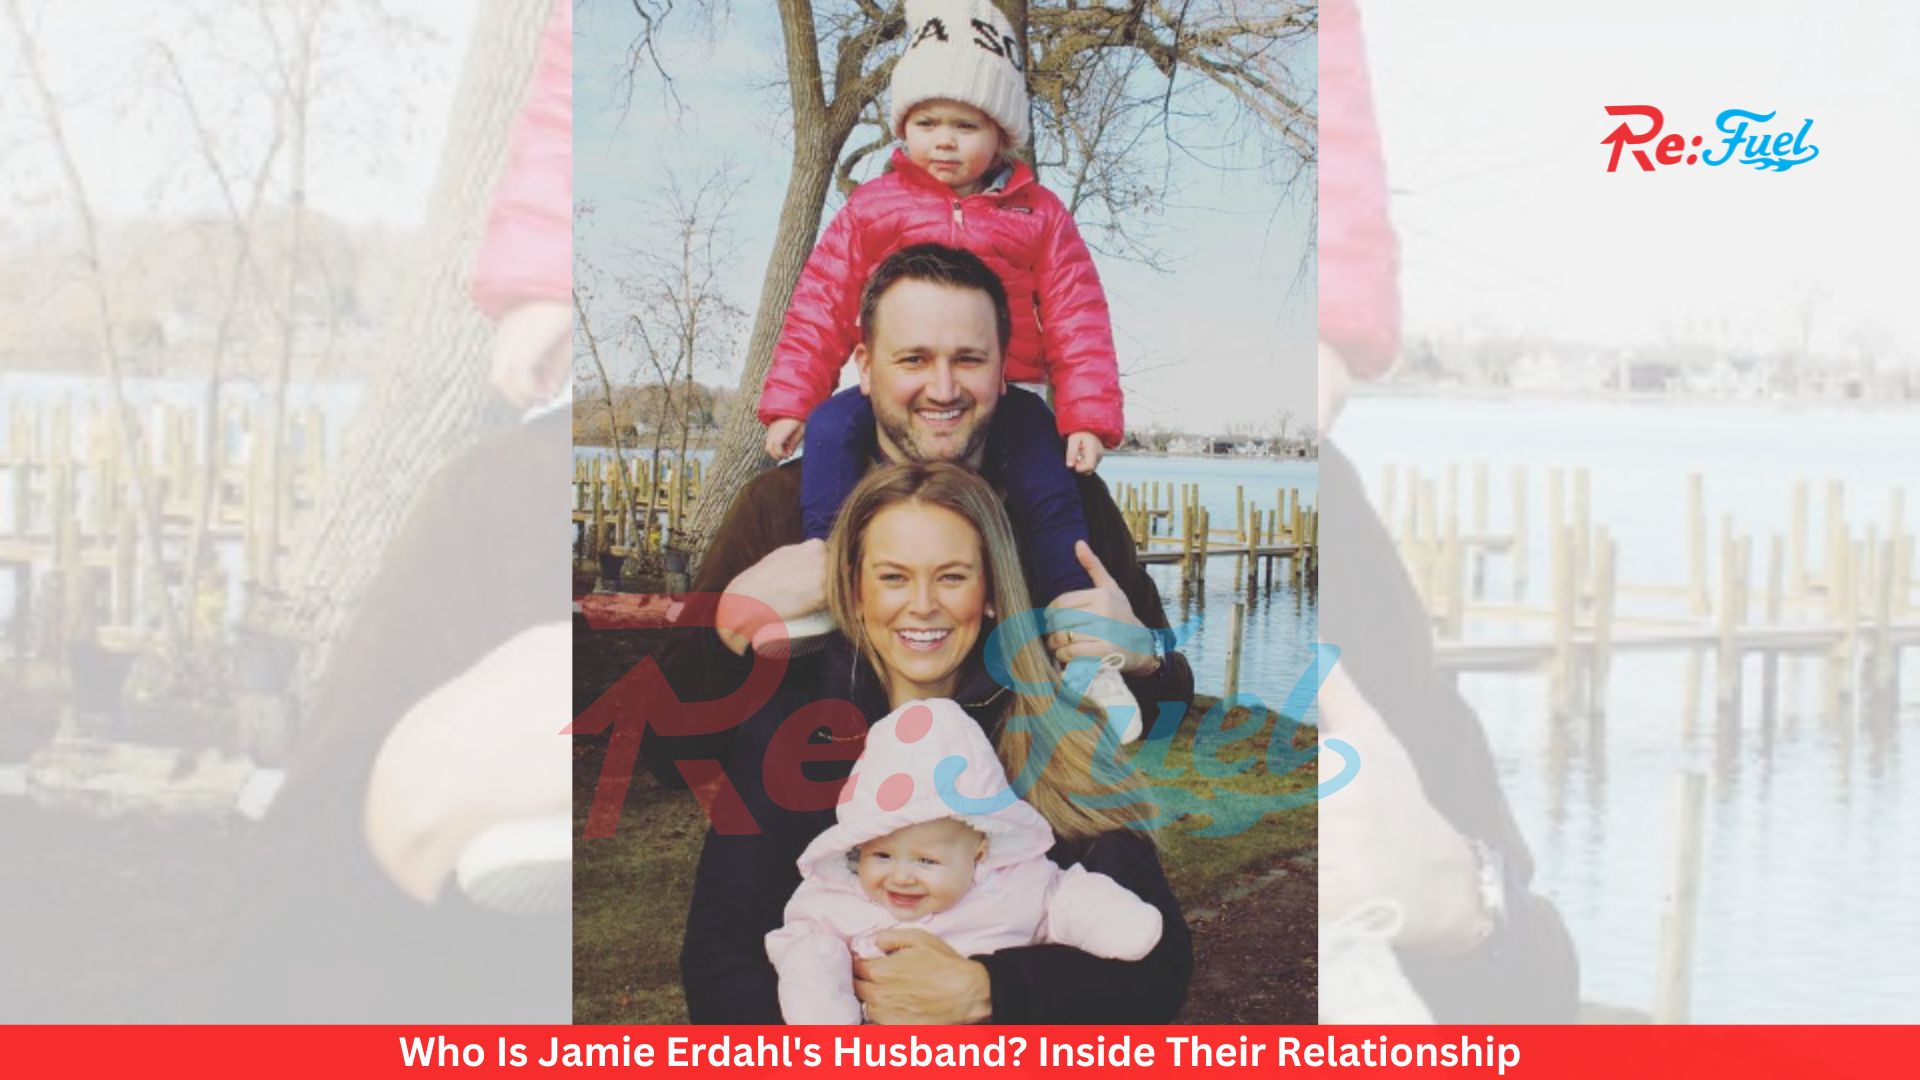 Who Is Jamie Erdahl's Husband? Inside Their Relationship